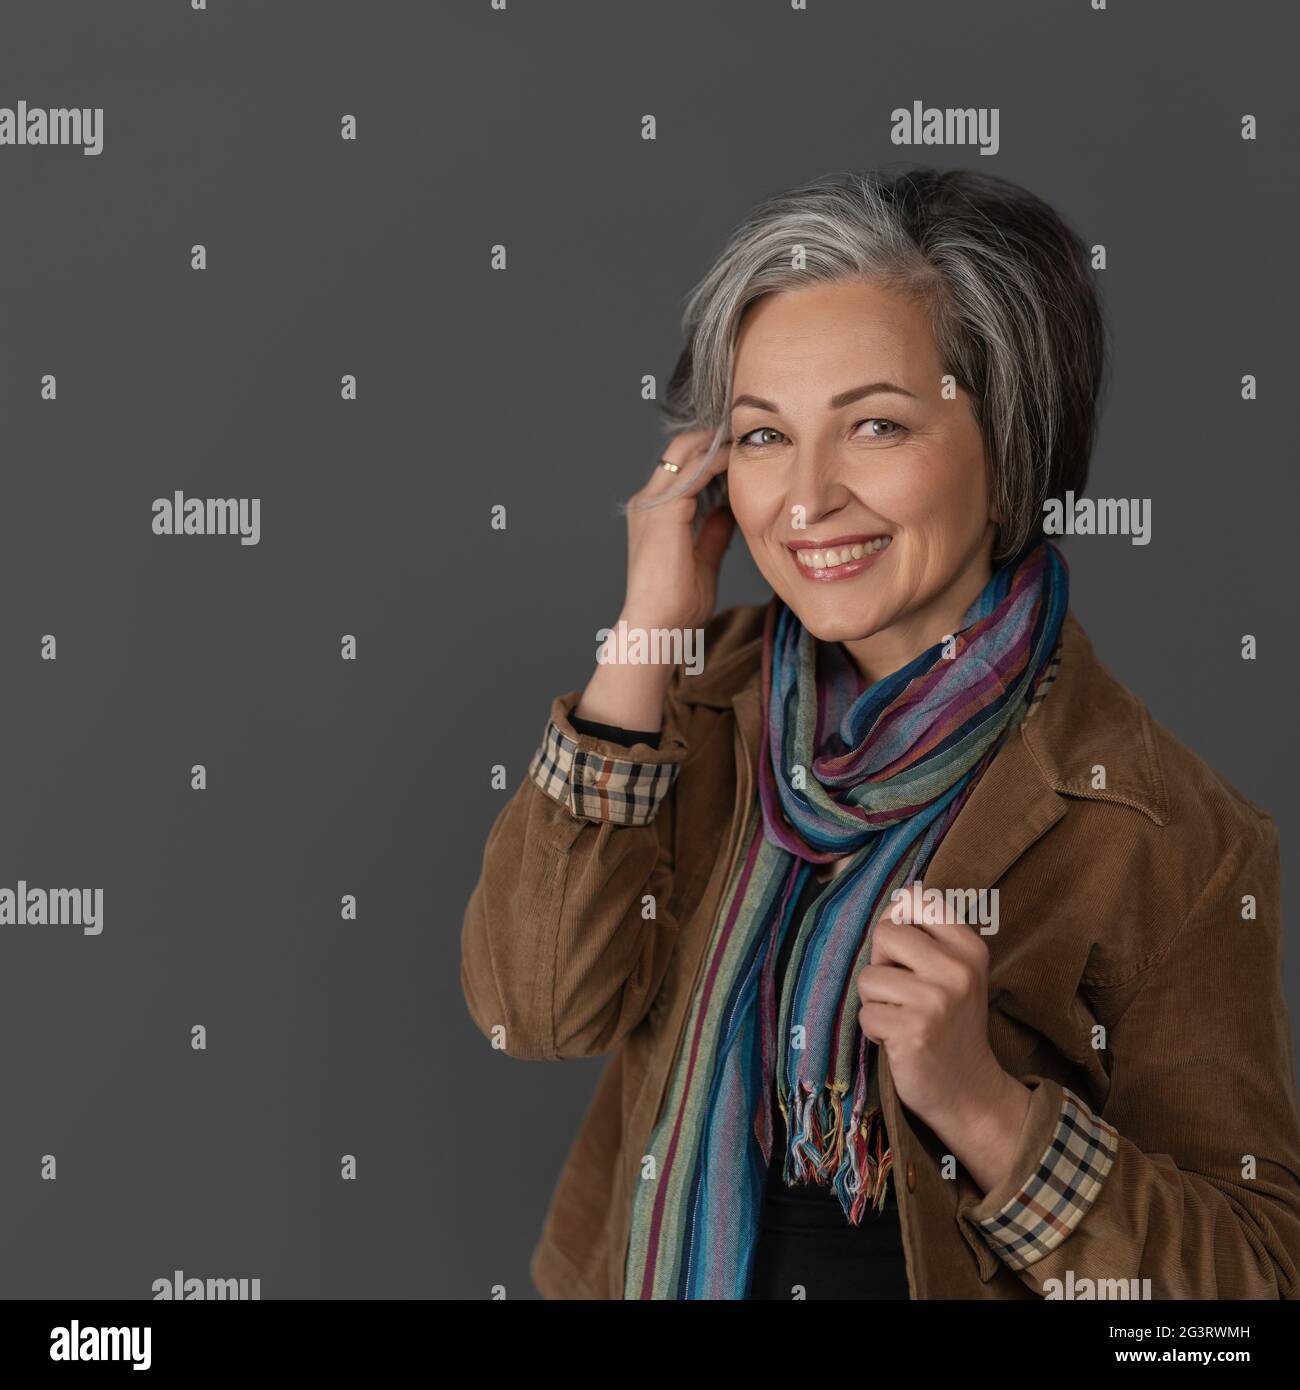 Creative mature woman in casual touching her graying short hair. Studio portrait on gray background. Copy space at left Stock Photo